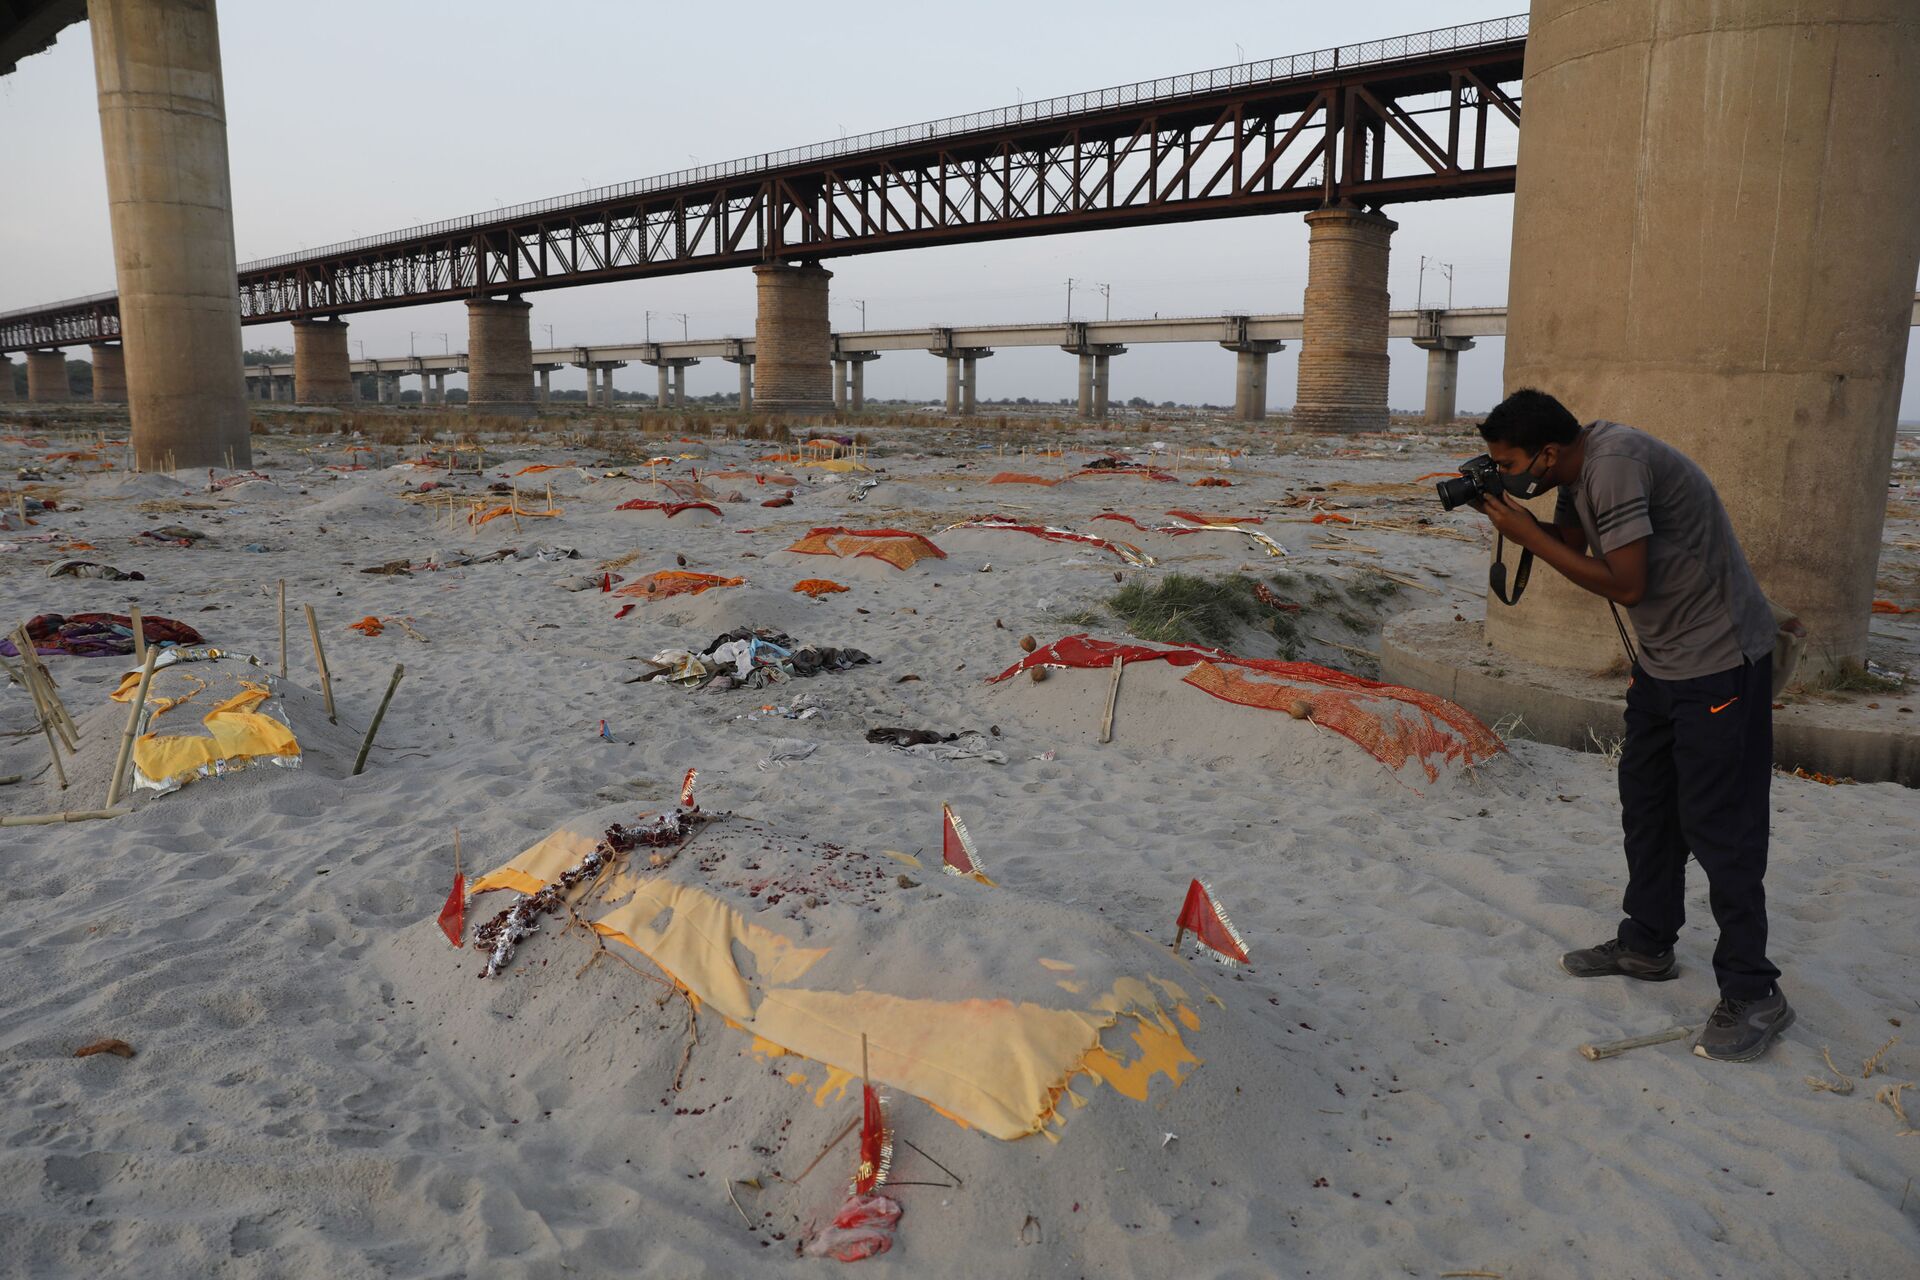 Bodies of suspected Covid-19 victims are seen in shallow graves buried in the sand near a cremation ground on the banks of Ganges River in Prayagraj, India, Saturday, May 15, 2021 - Sputnik International, 1920, 24.12.2021